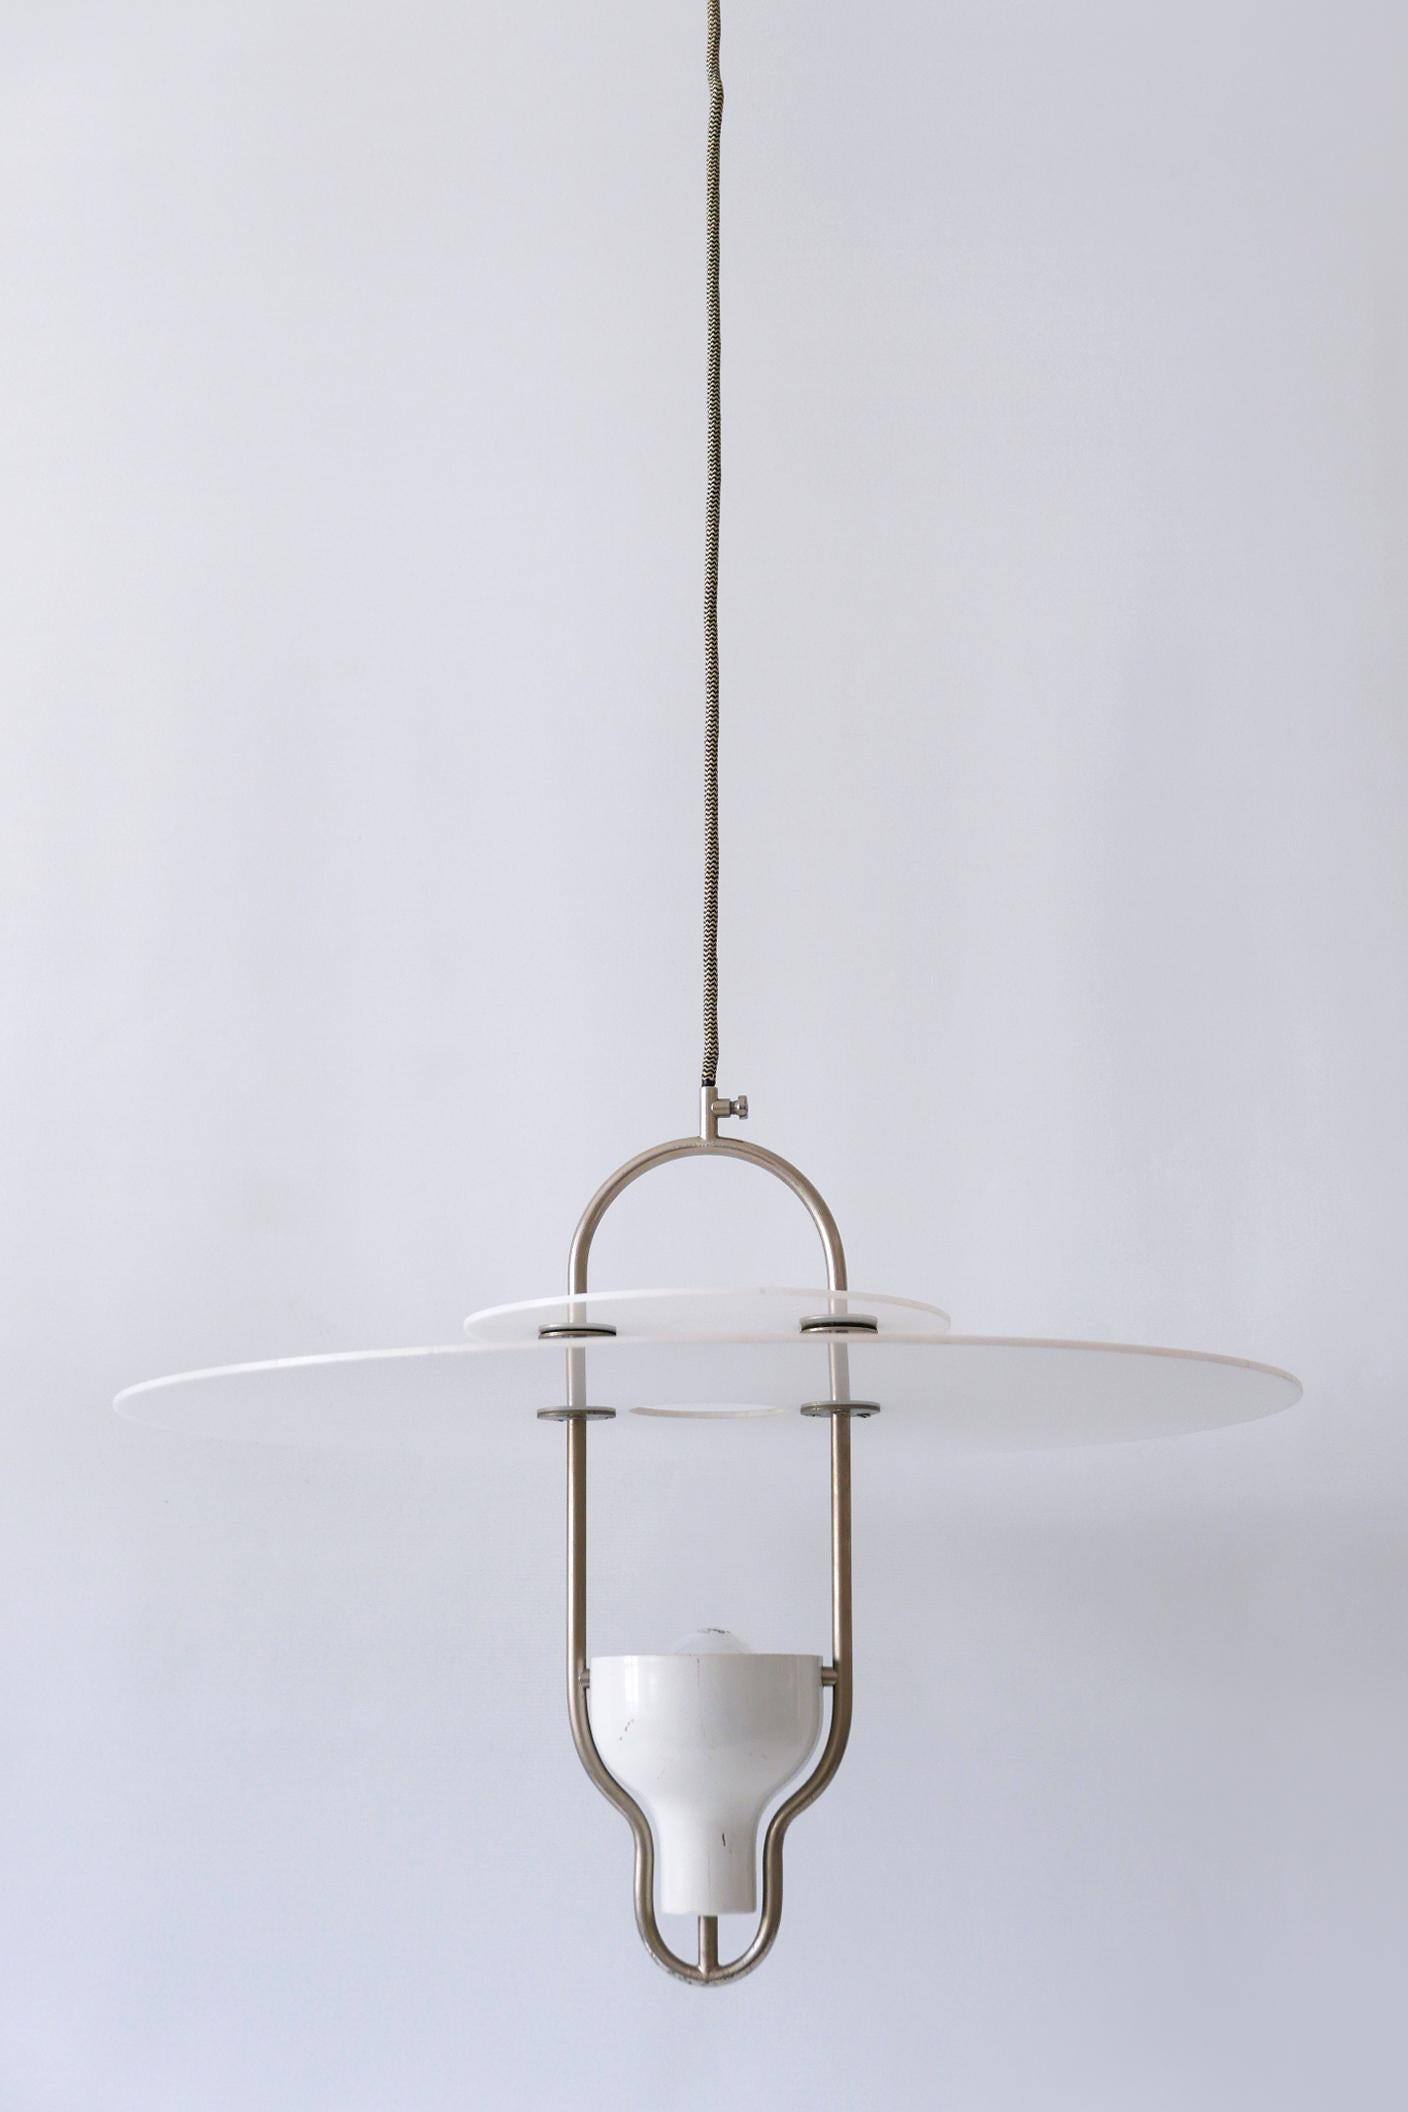 Exceptional Mid-Century Modern Ufo Pendant Lamp, Italy, 1960s For Sale 1